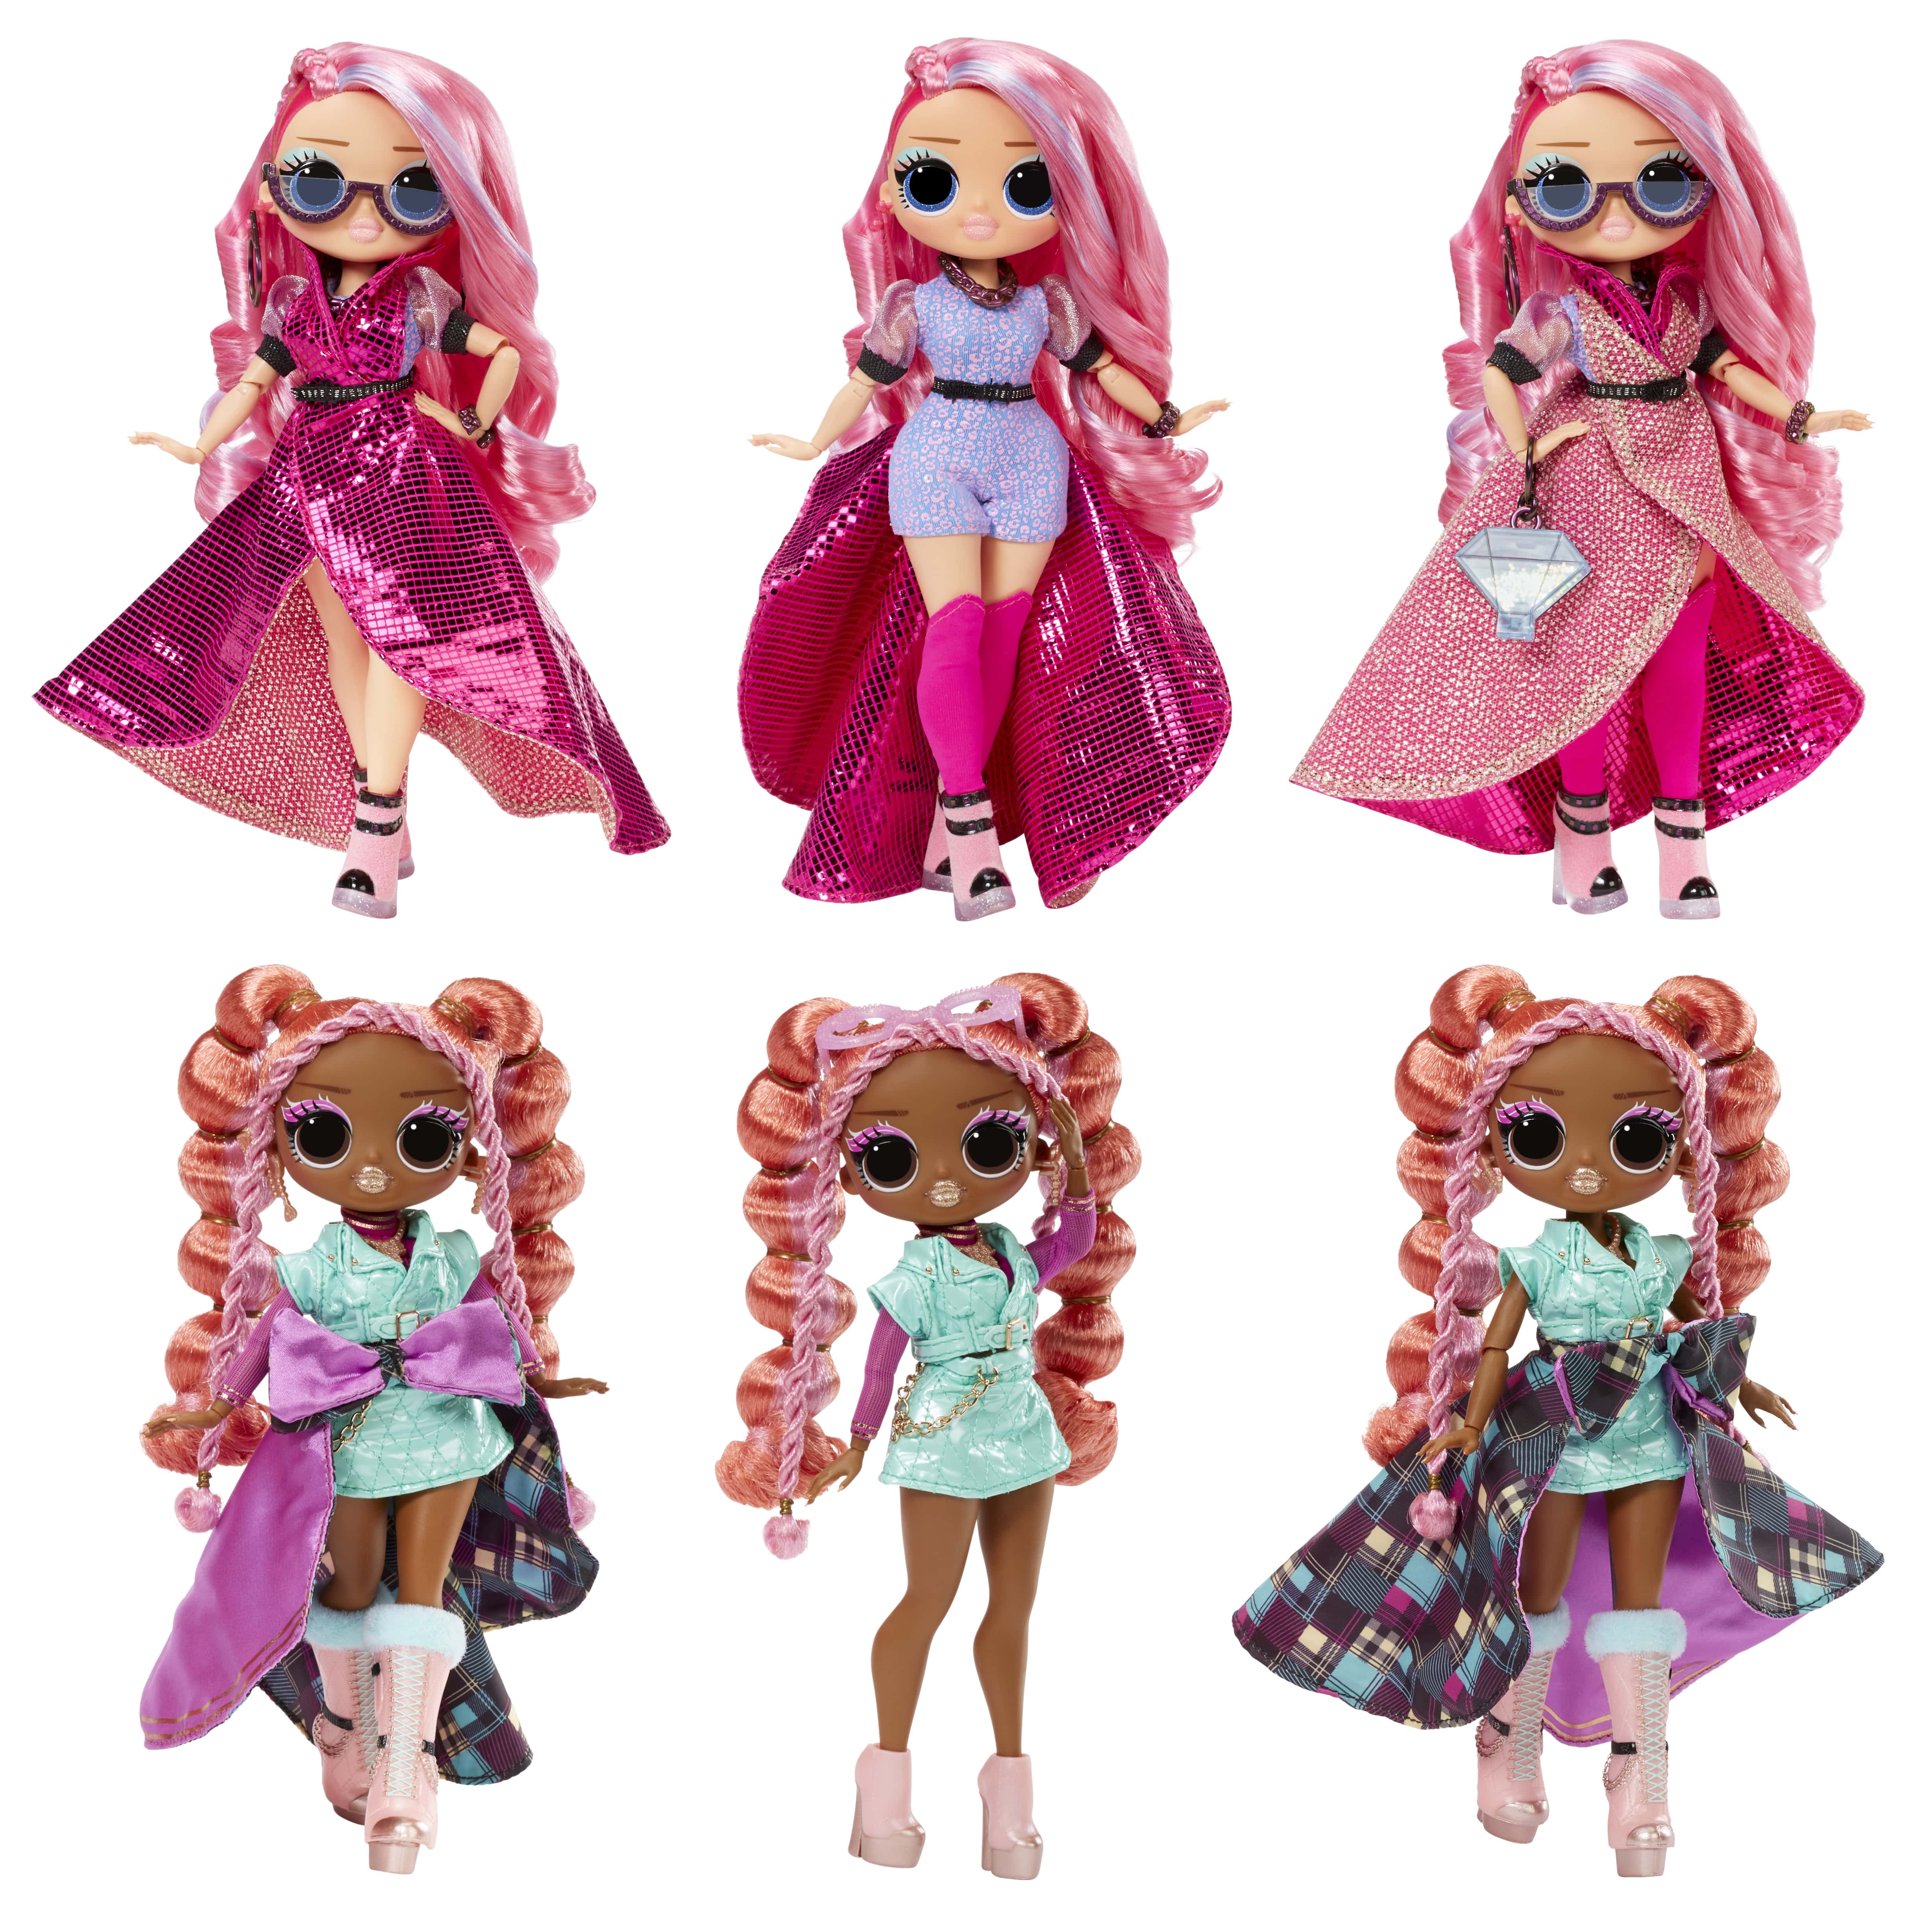 LOL Surprise Doll Fashion Show Mega Runway Playset with 80 Surprises, Ages 4 and up - image 5 of 7